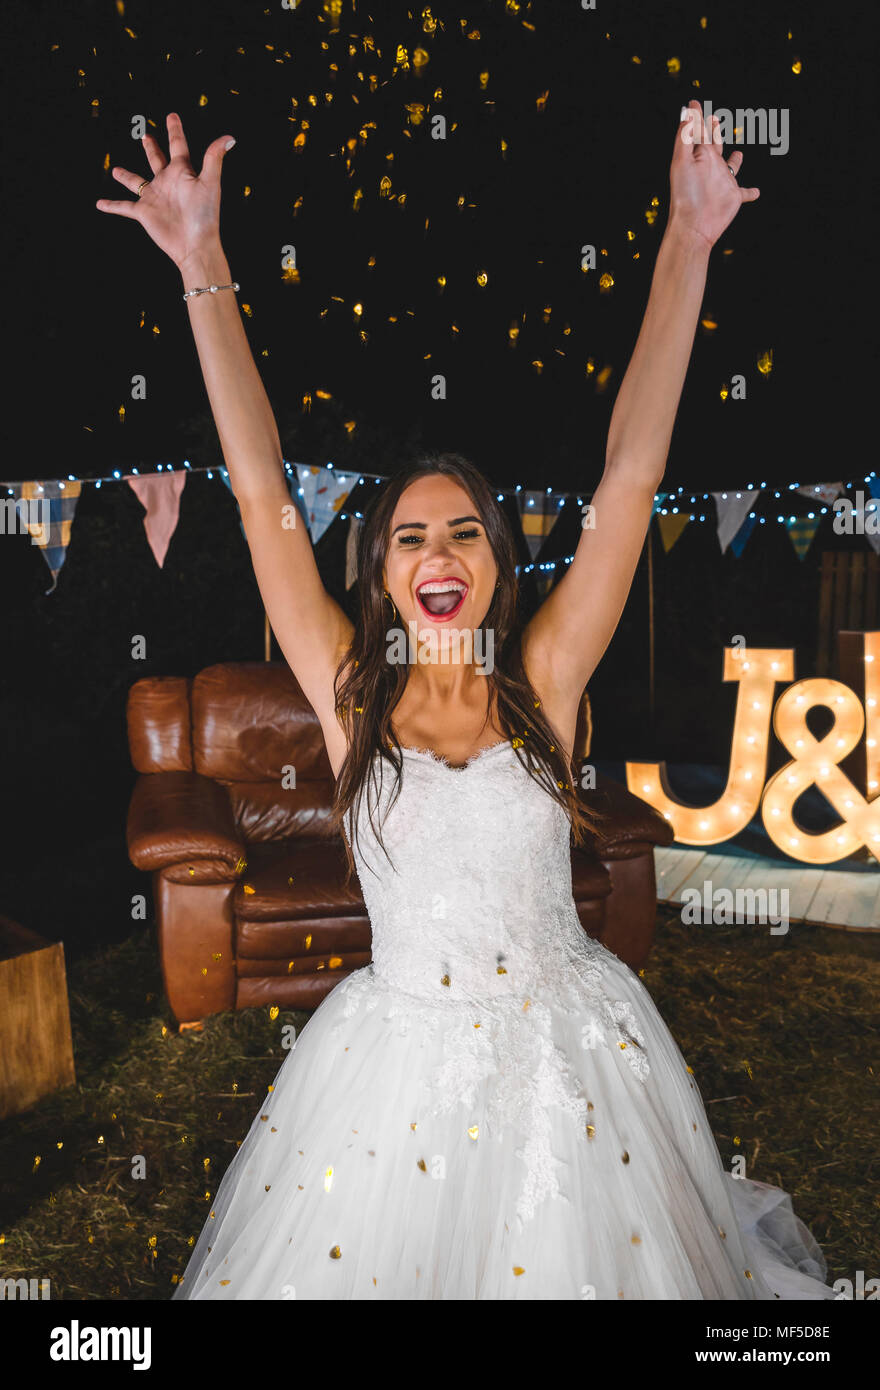 Cheerful bride raising her arms while confetti falling over her on a night party outdoors Stock Photo